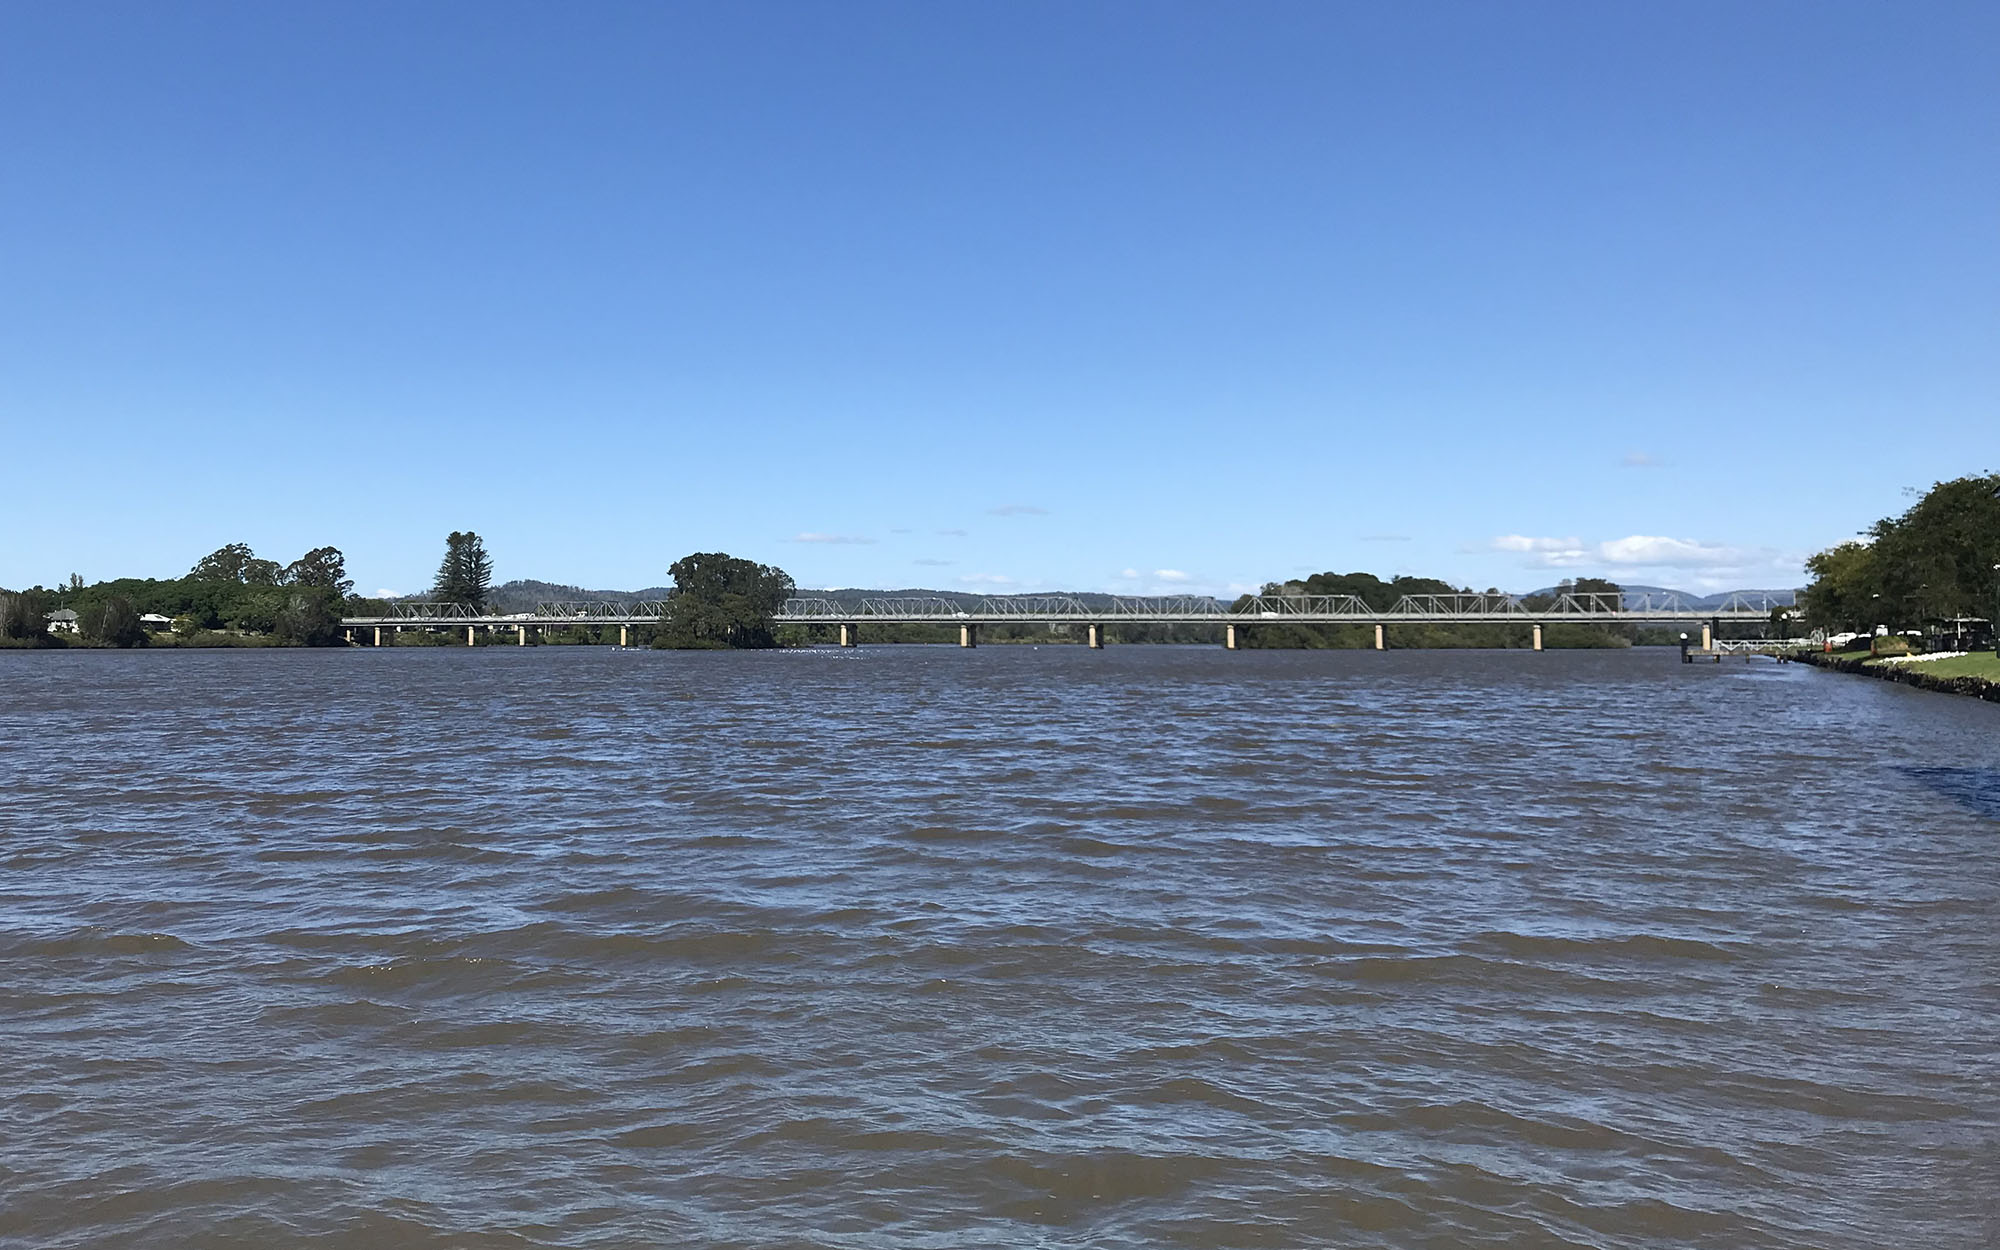 Manning River at Taree with the bridge in the background. Image credit: Dushmanta Dutta DPE